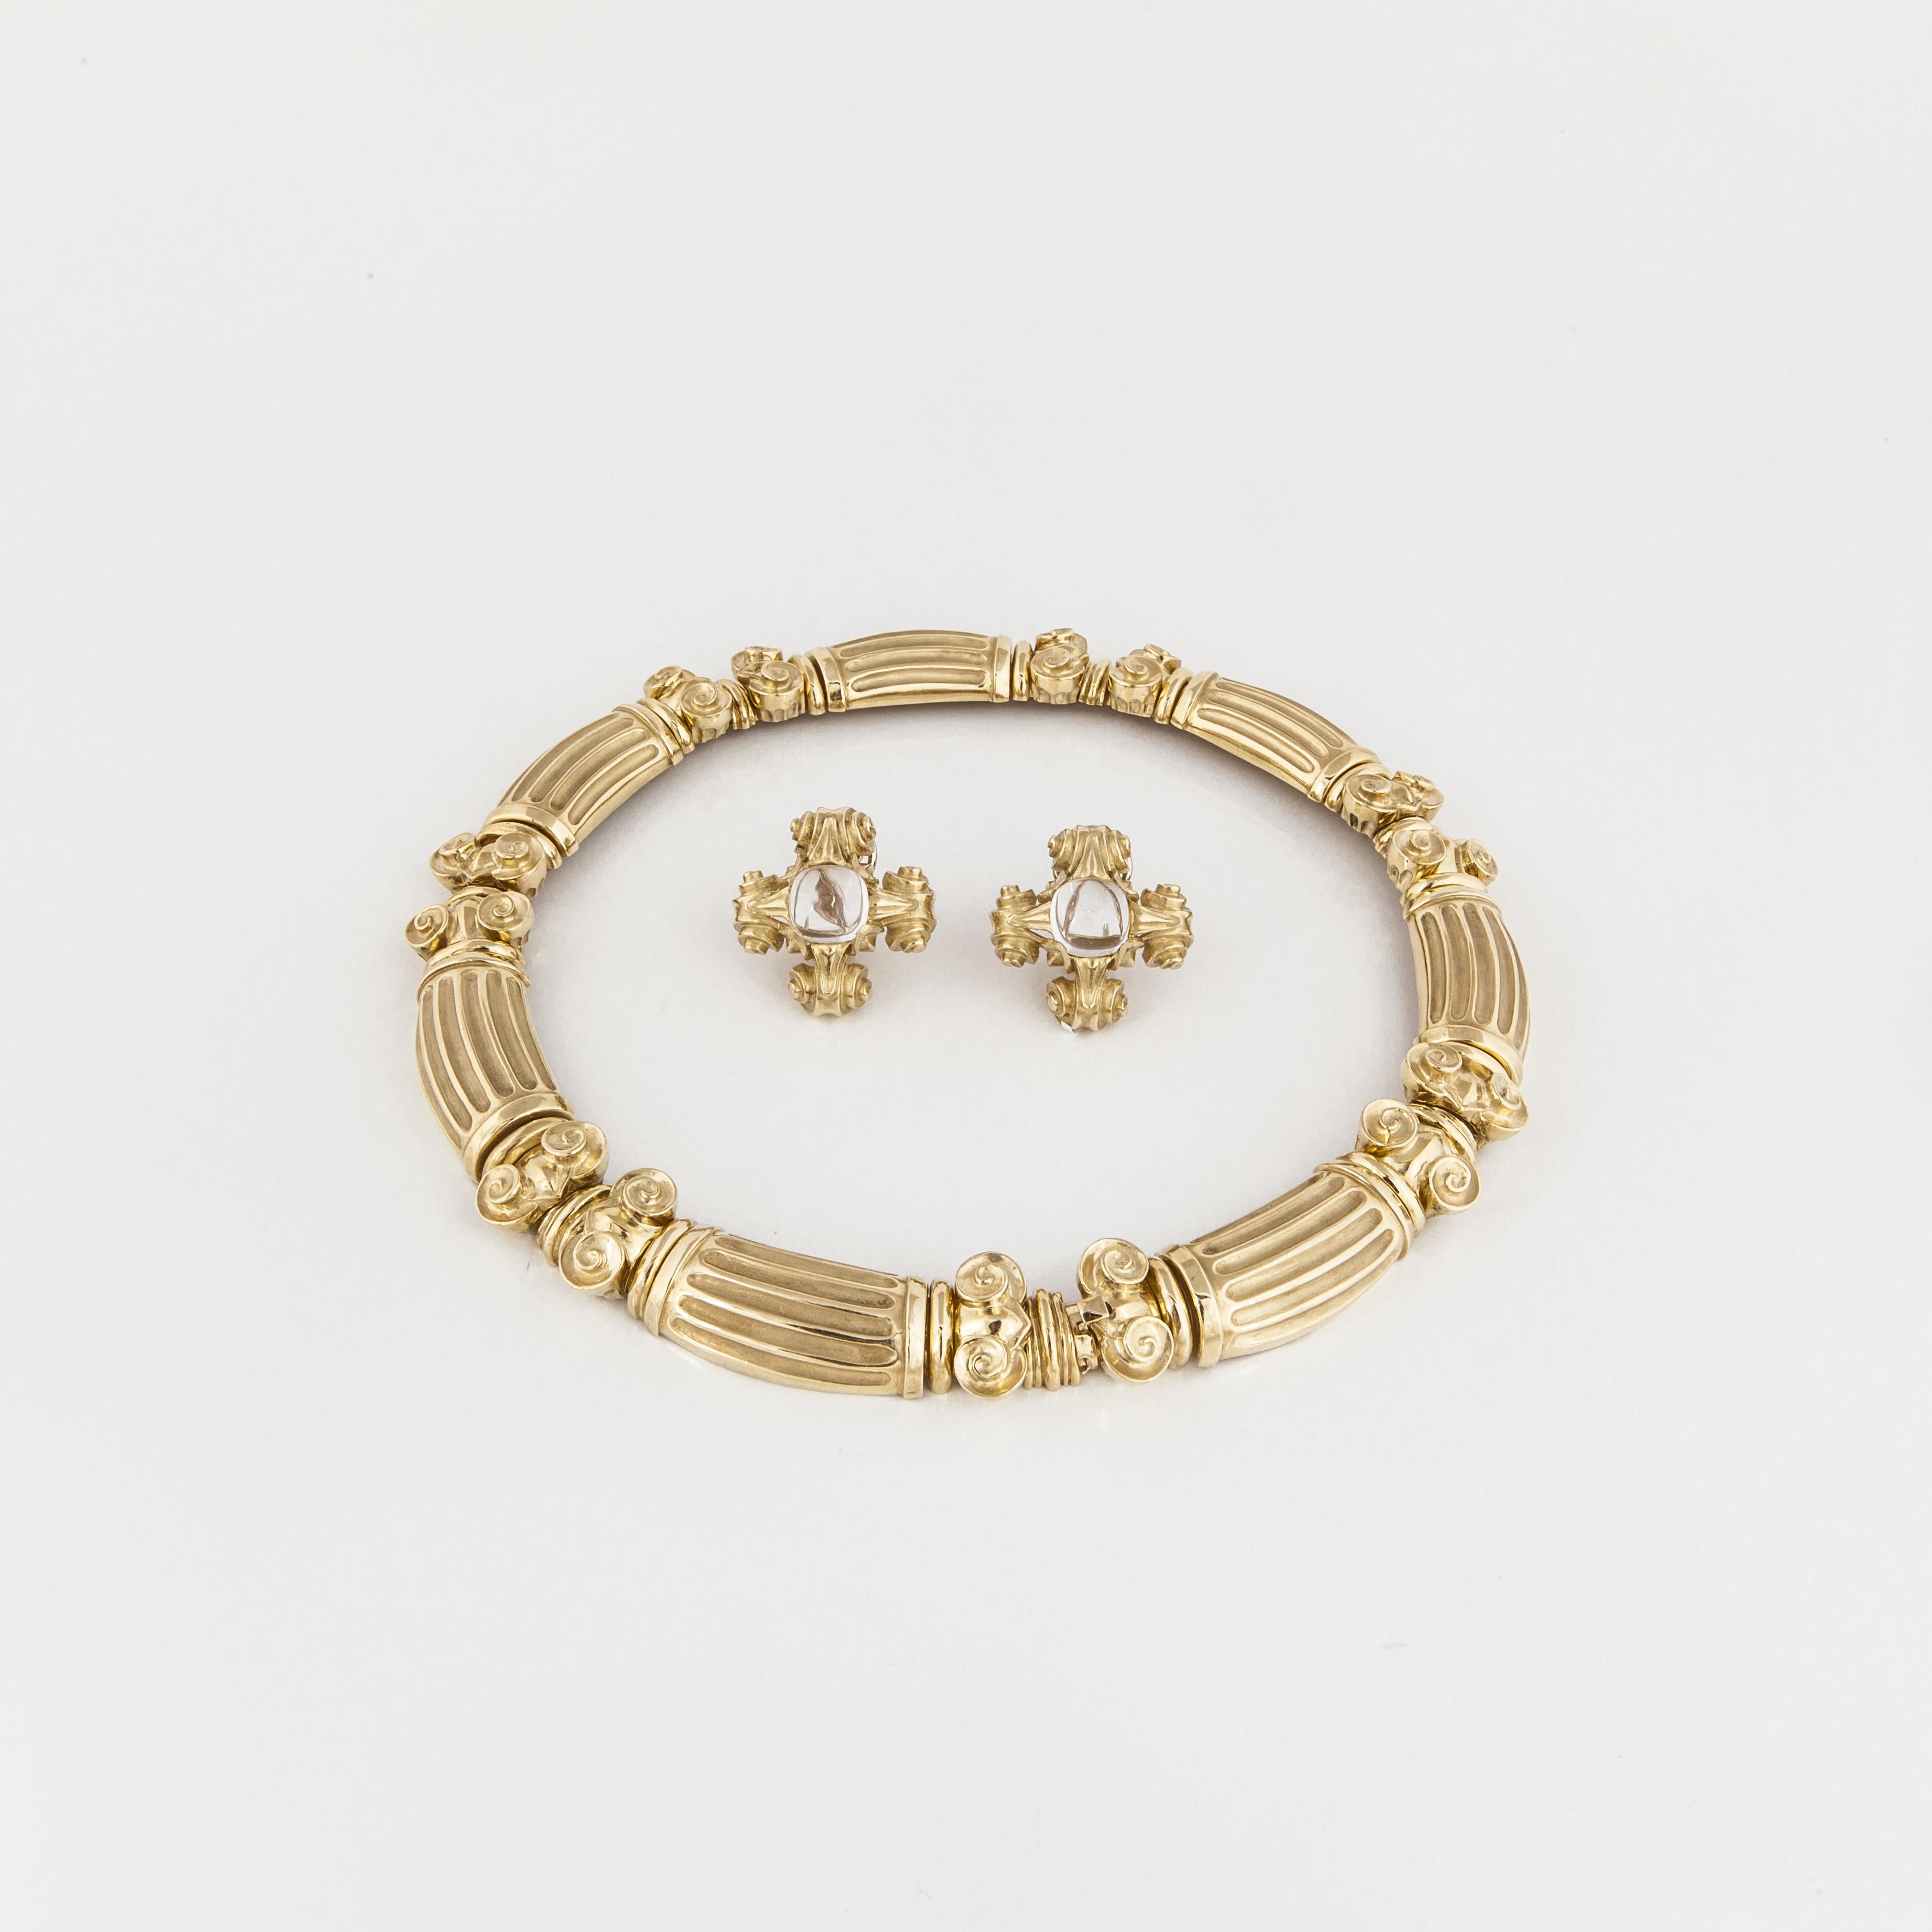 Esti Frederica jewelry suite in 18K yellow gold.  The choker necklace contains links that resemble columns with scrolling in between.  Necklace measures 15 1/2 inches long and 5/8 inches wide.  Tongue closure with underneath safety.  The earrings